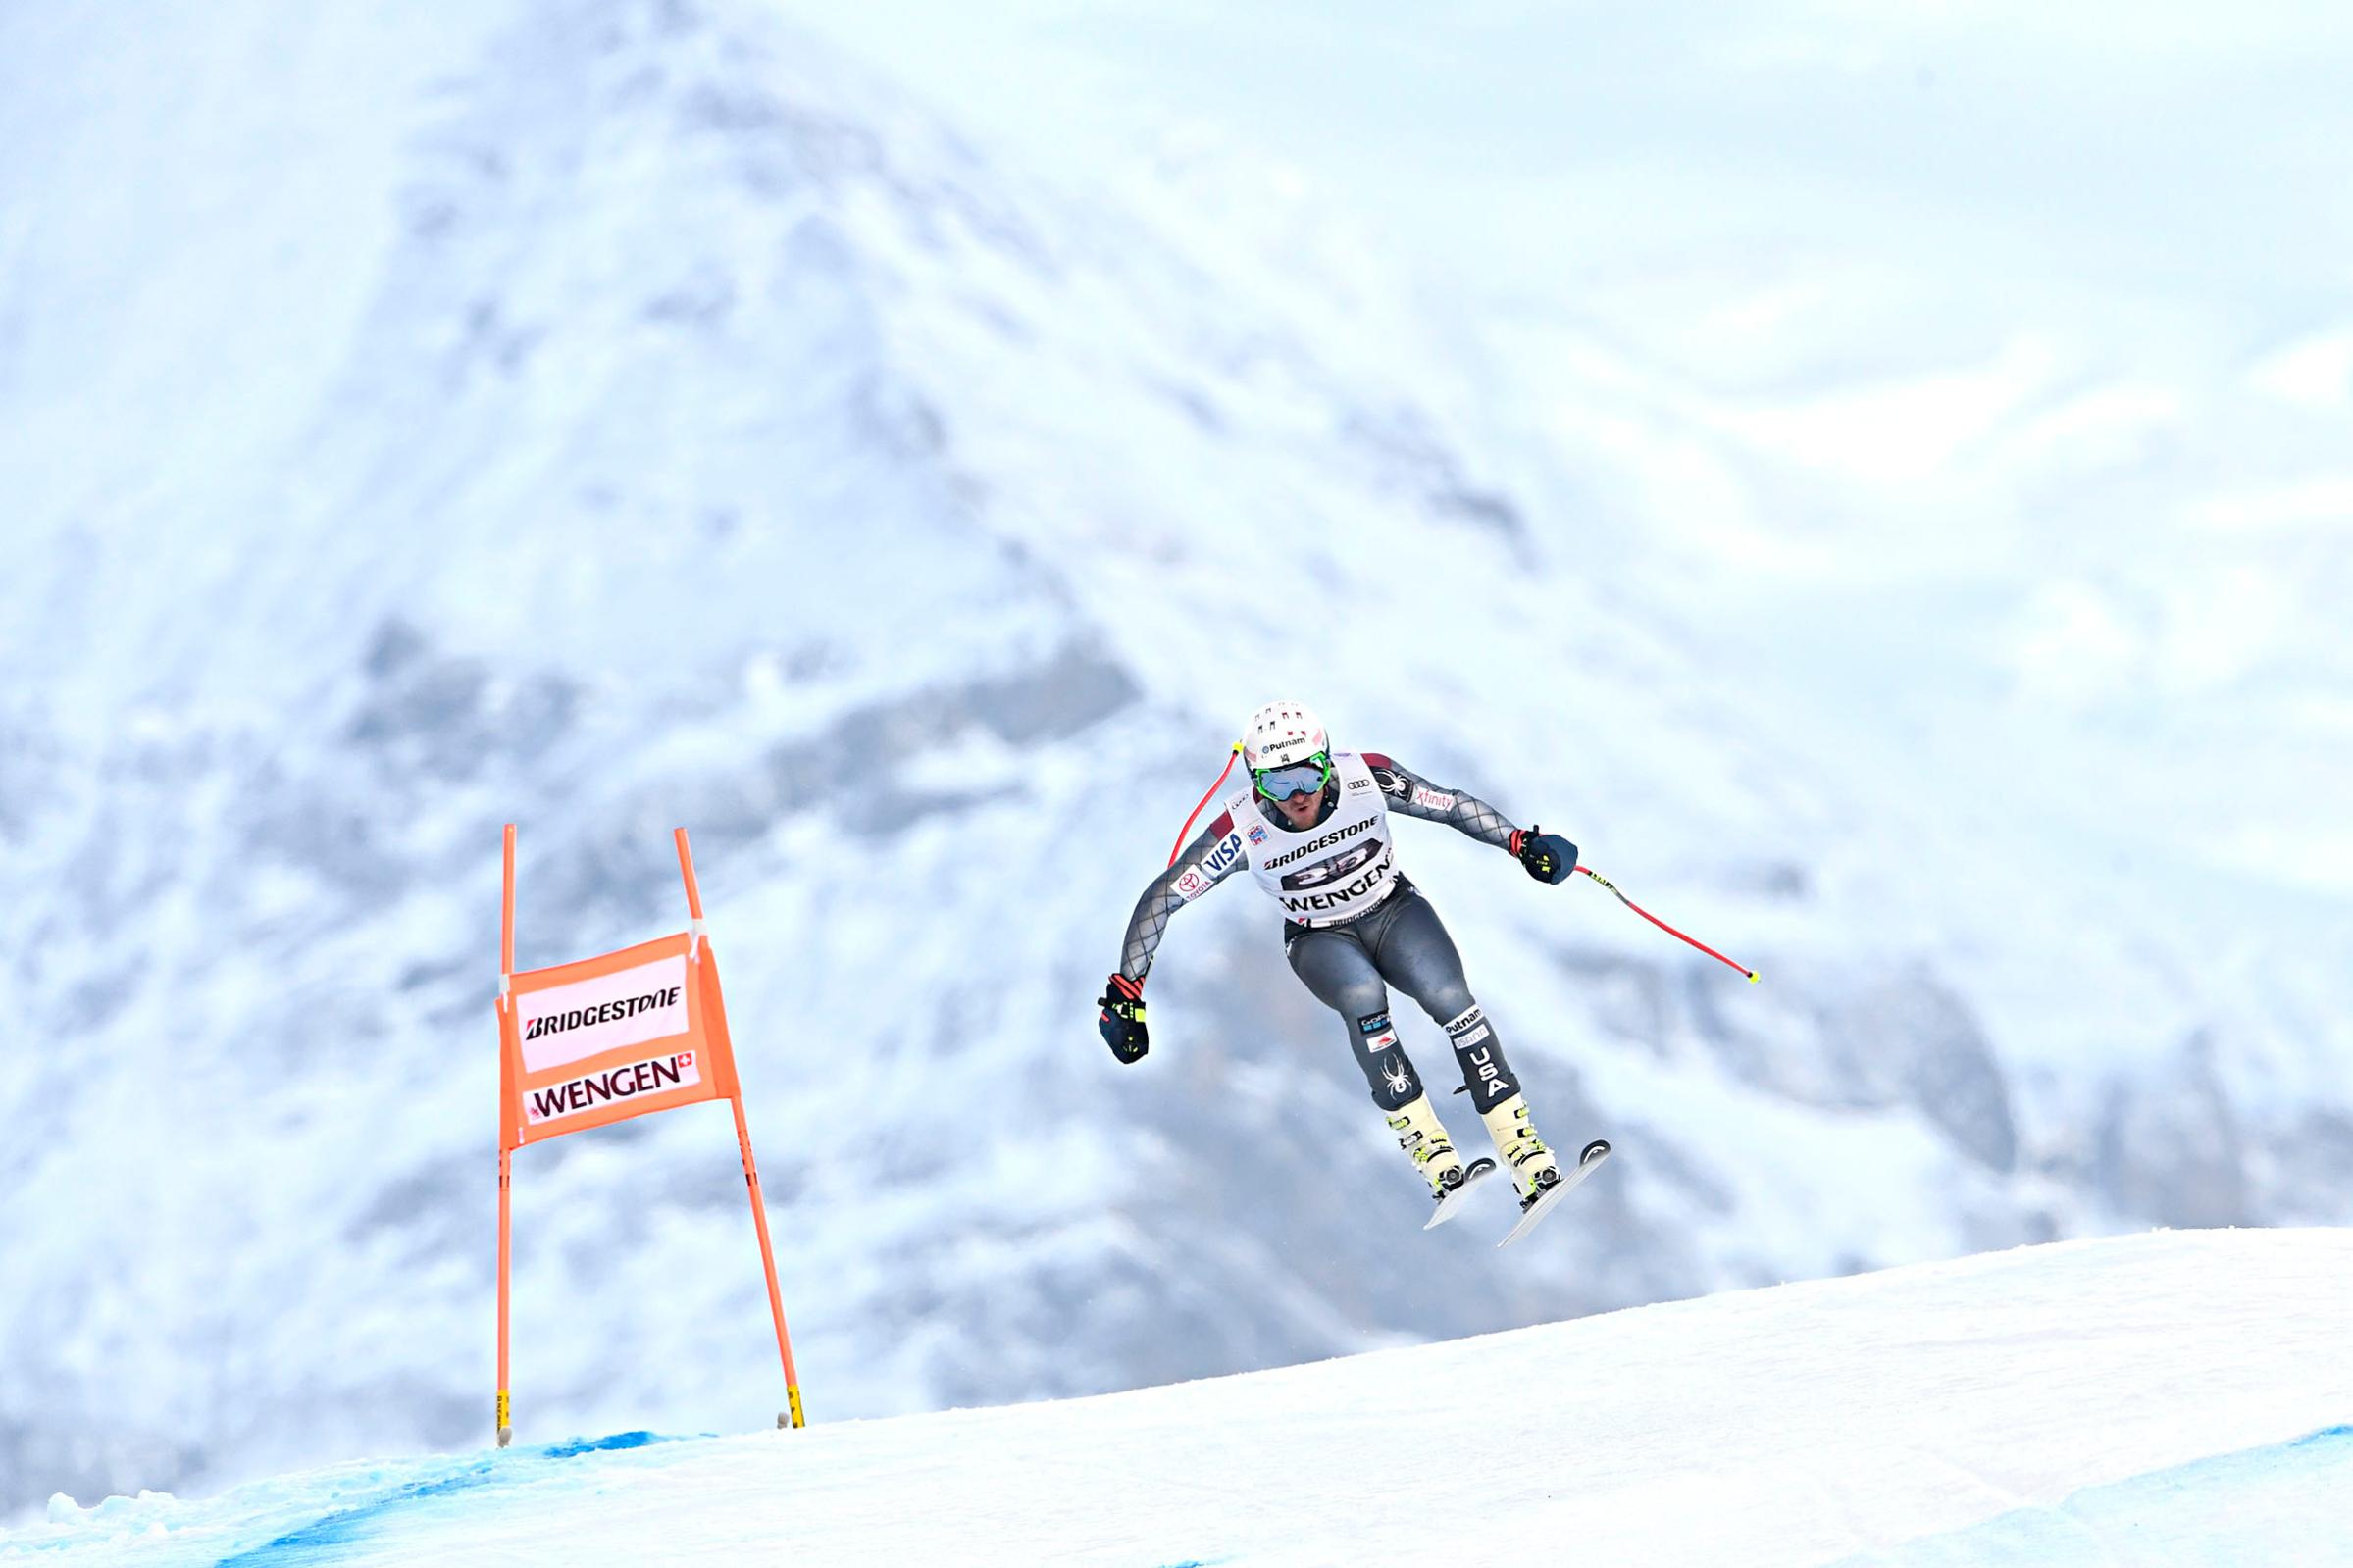 Ted Ligety of USA in action during the Audi FIS Alpine Ski World Cup Men's Combined in Wengen, Switzerland, on Jan. 12, 2018.